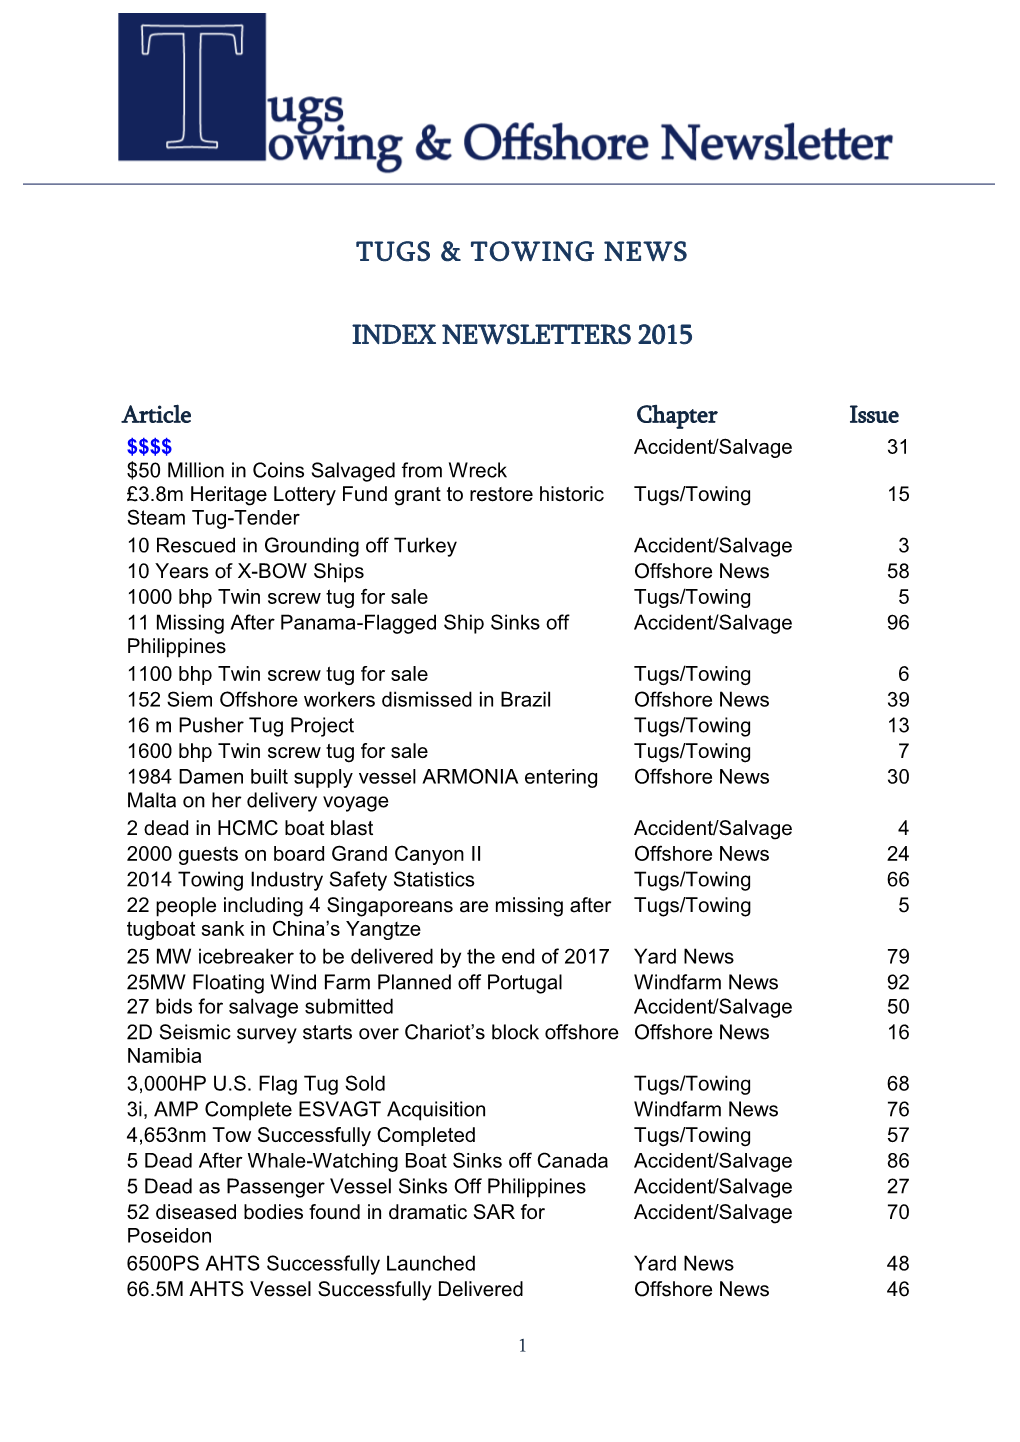 Tugs & Towing News Index Newsletters 2015